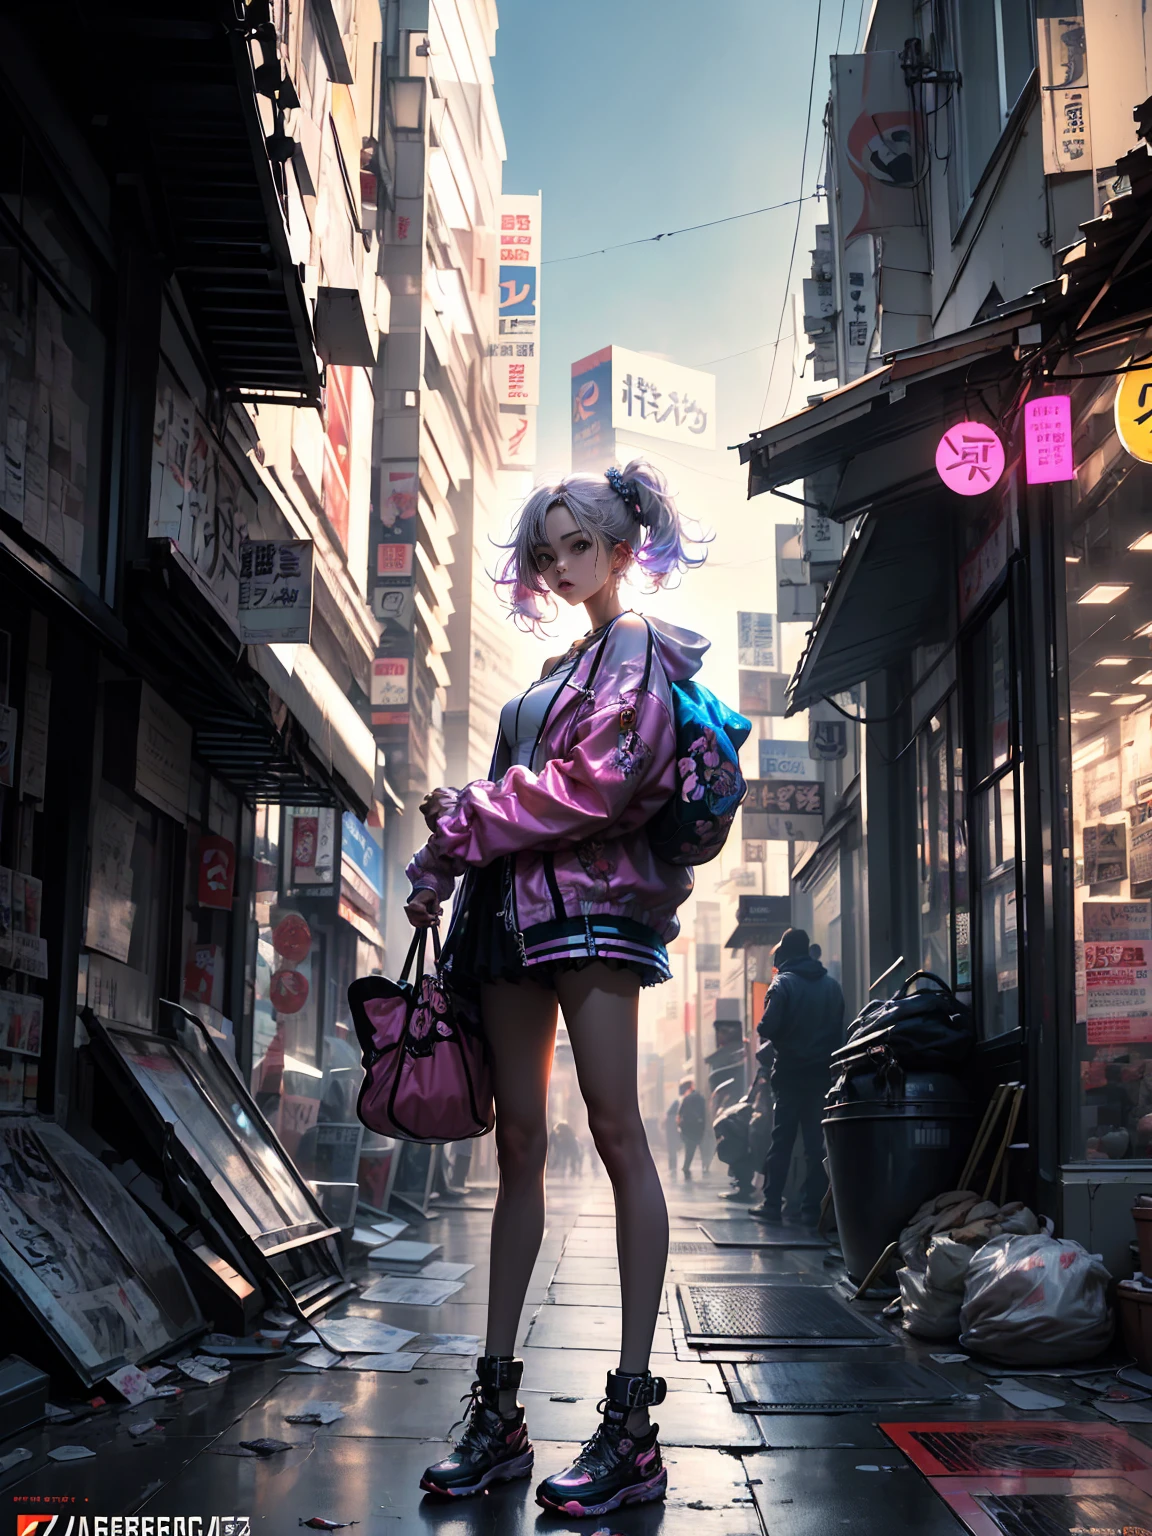 ((Stunning masterpiece anime illustration.)), ((Extremely delicate and beautiful cyber girl.)), ((Very detailed and exposed face)), ((mechanical member, )), (tube connections that join the neck:1.2), ((mass of wires and cables in the body)), ((wearing a colorful Harajuku technical jacket with logo)), (dynamic pose), ((futuristic motorcycle on left side)), ((at night sky with smog)),(Masterpiece), (((Best Quality))), ((ultra detailed)), (Highly detailed photorealistic CG illustration), cinematic lighting, Science fiction, extremely detailed,showy,more detail, (((cyberpunk city background, (Rewarded accommodation), harajuku district))), NSFW